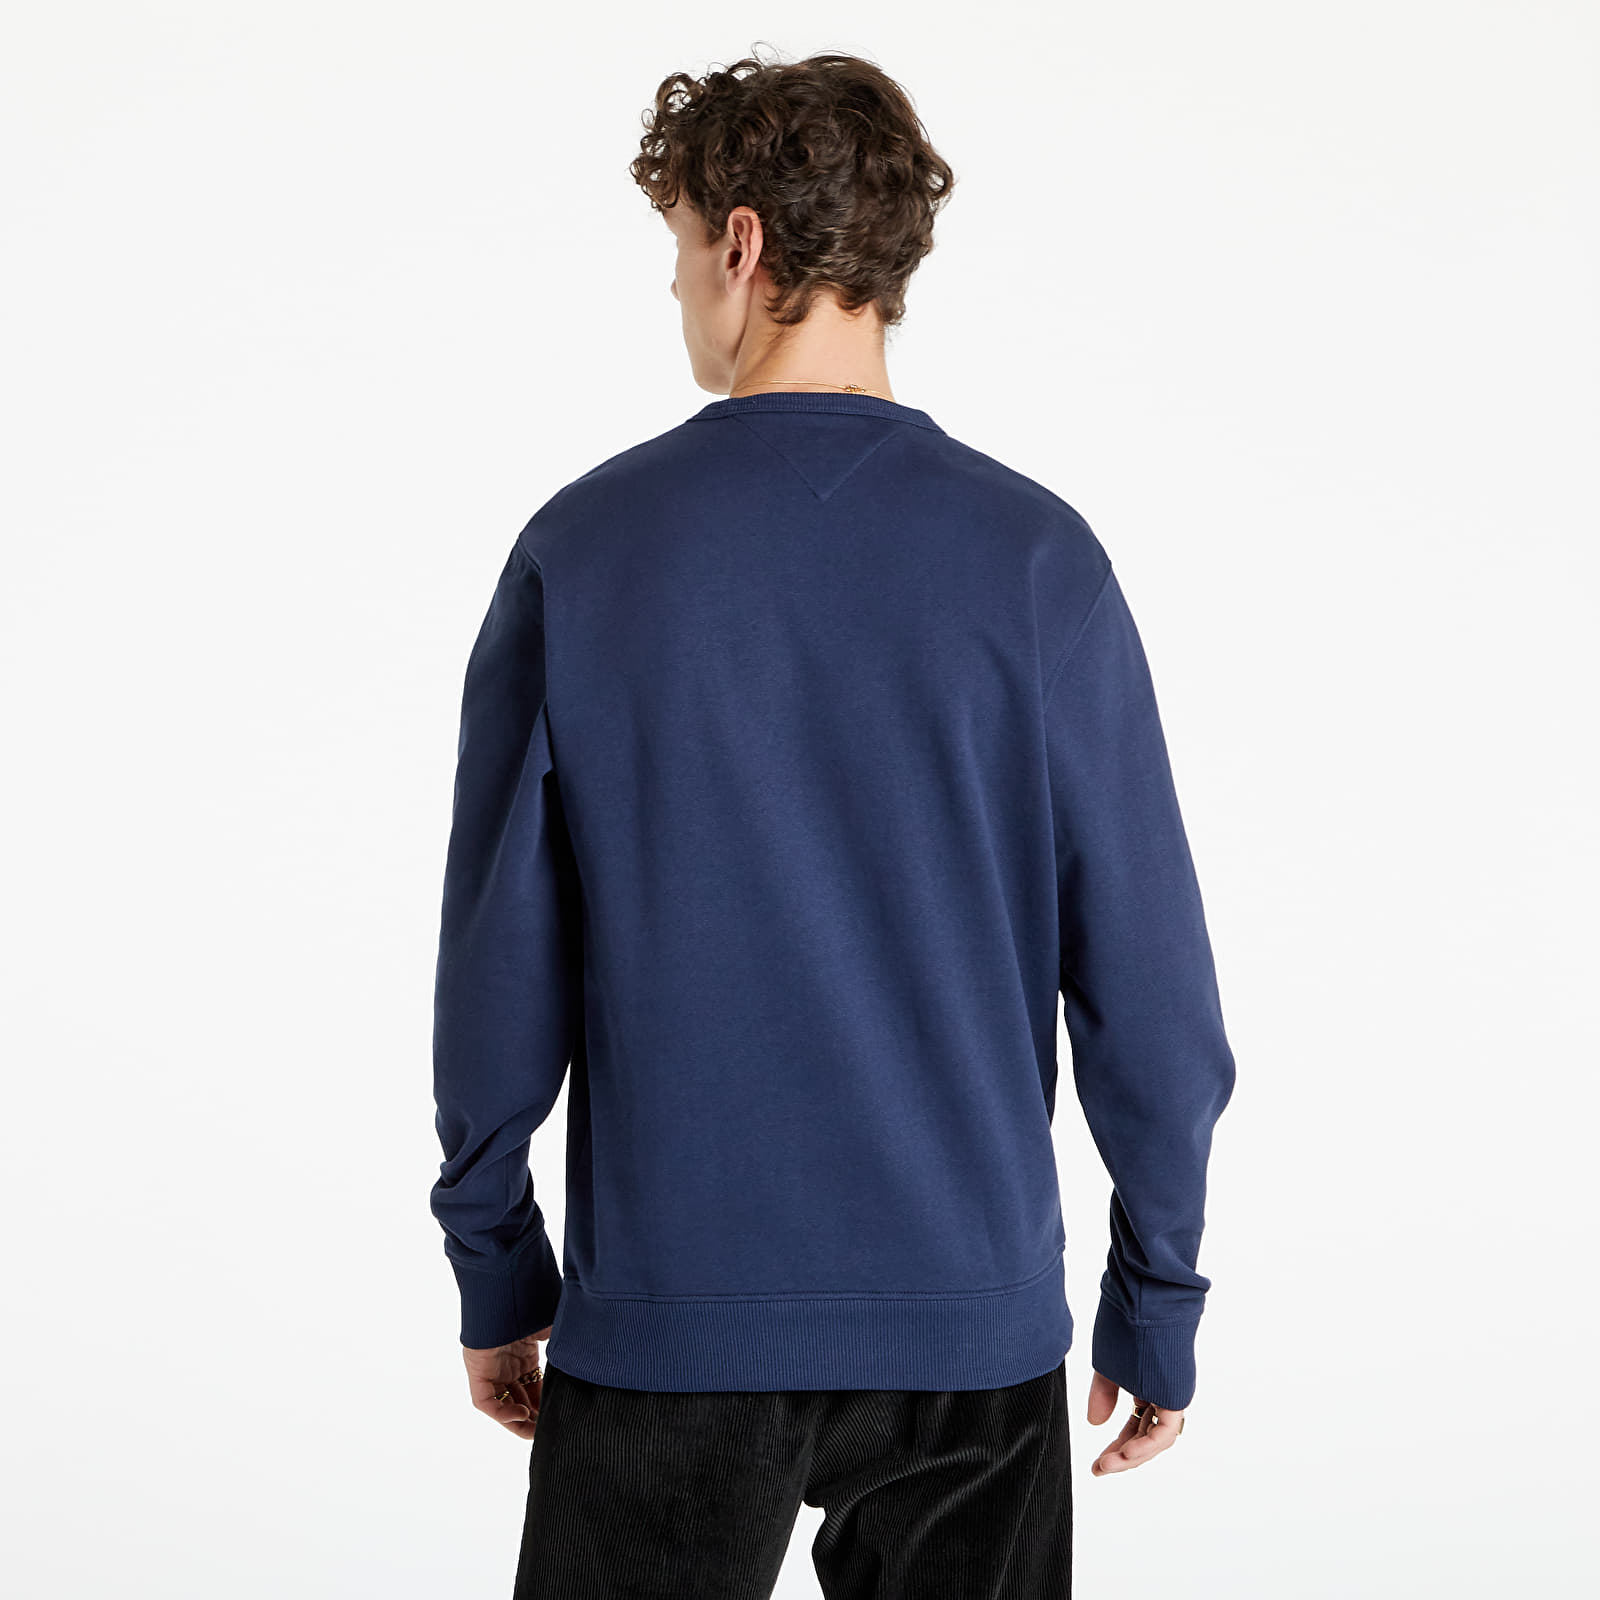 Hoodies | Twilight Graphic Entry Crew Footshop Navy Jeans Tommy sweatshirts and